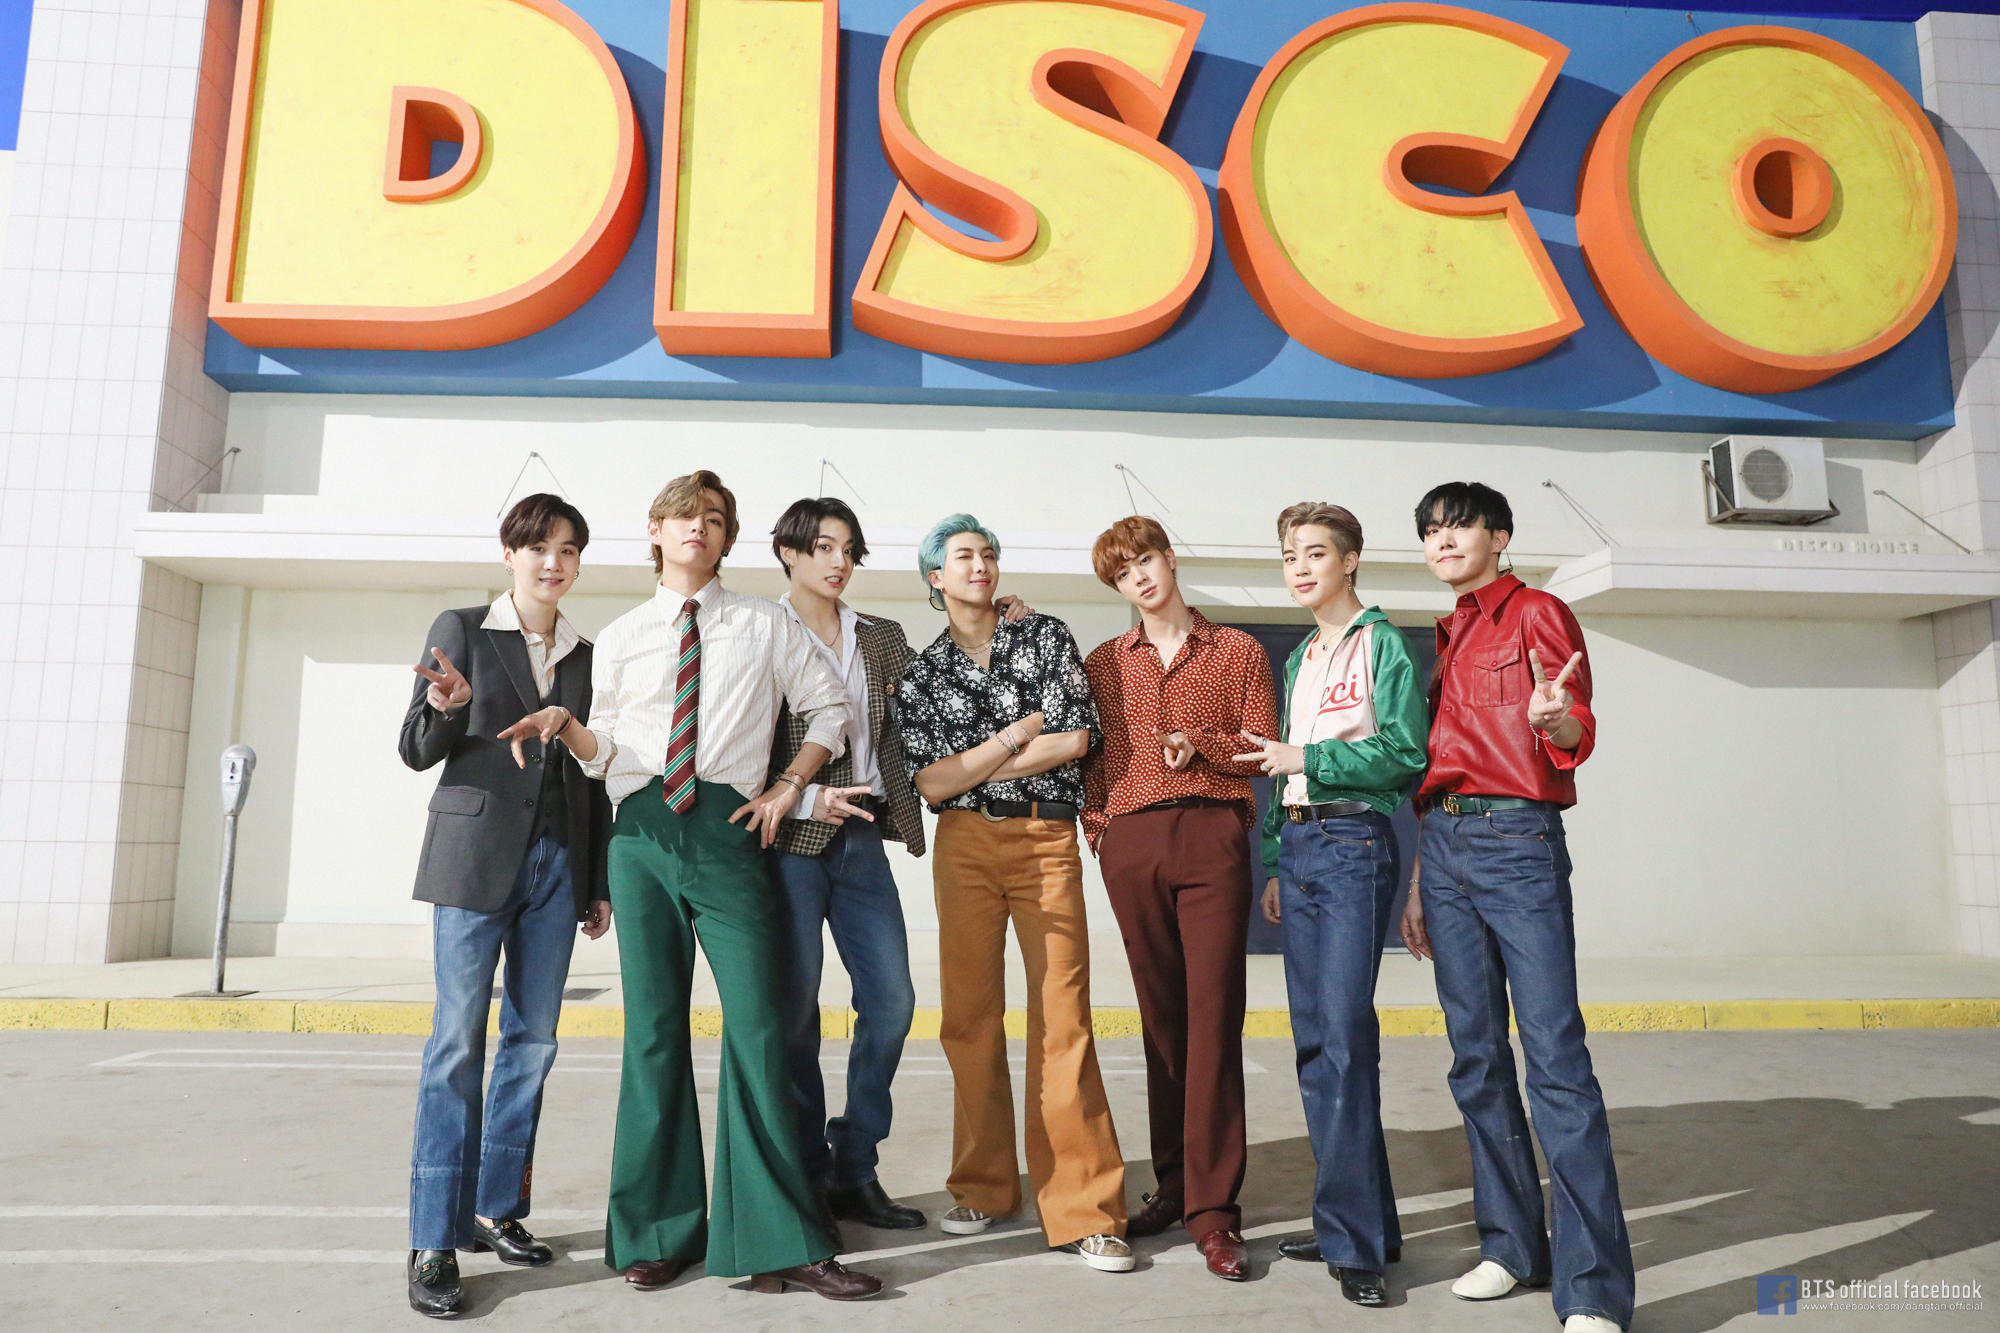 BTS posing in front of a sign that says "disco" in big letters.